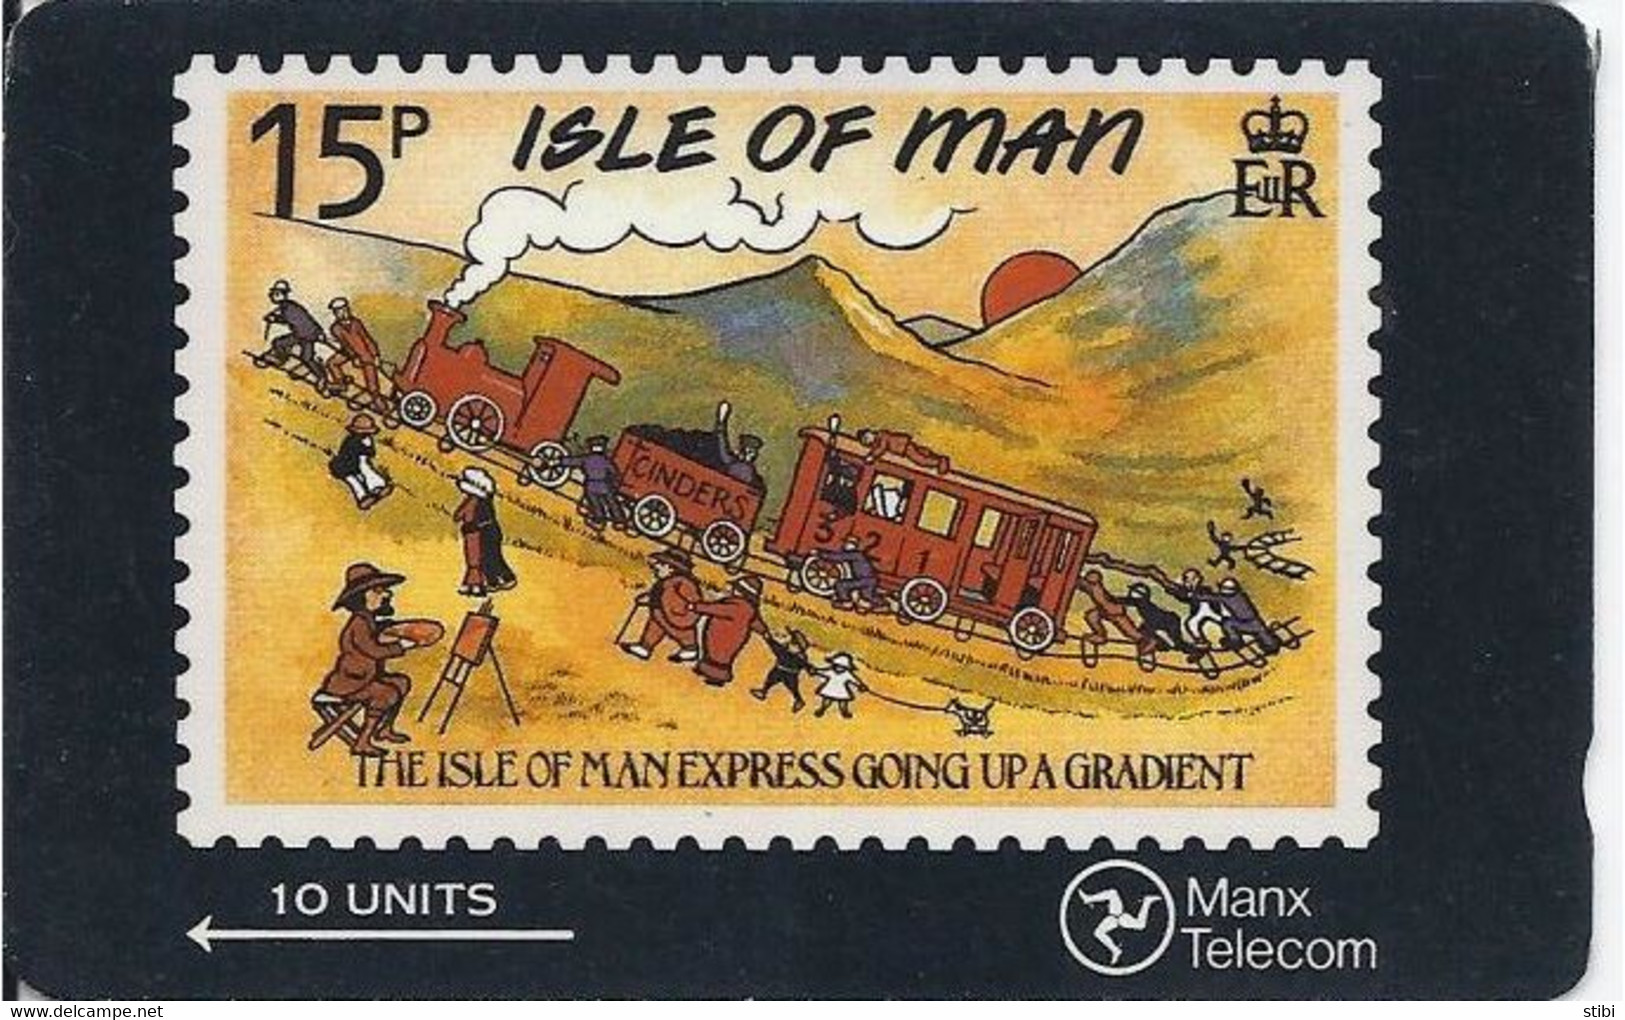 ISLE OF MAN - The Isle Of Man Express Going Up A Gradient - STAMP - 15.000EX - Man (Isle Of)